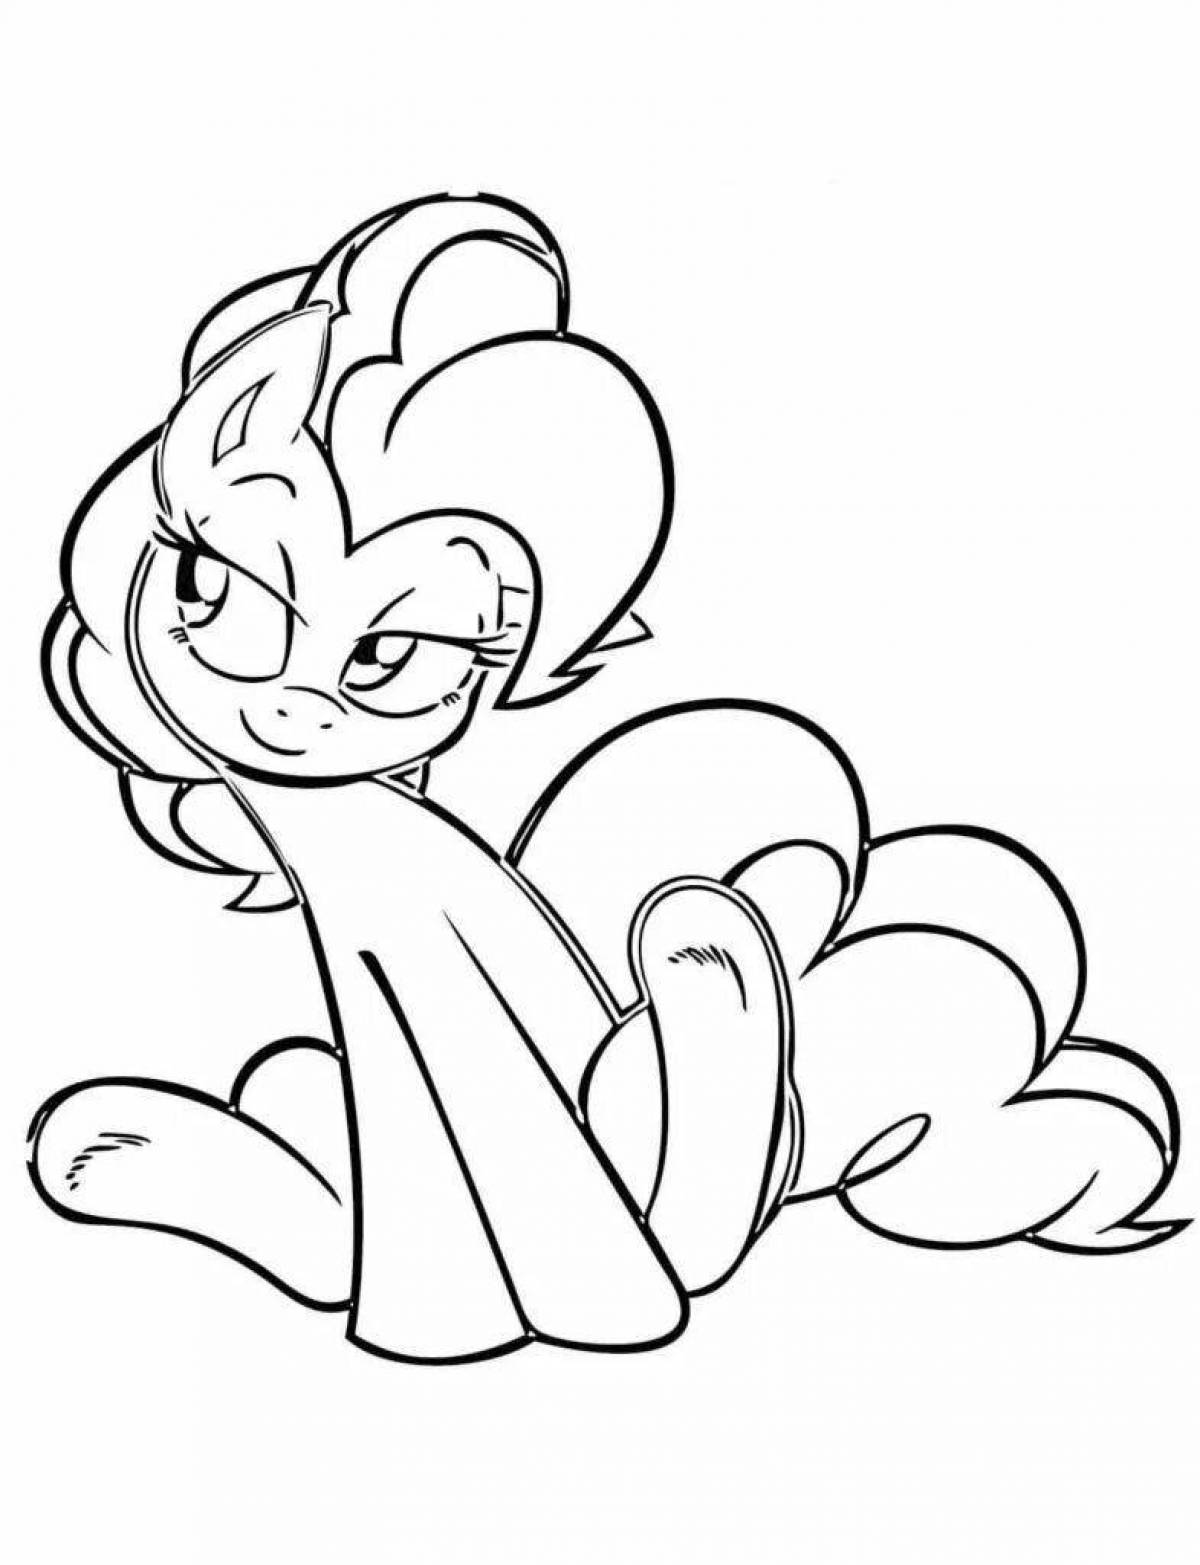 Coloring page excited pinkie pie